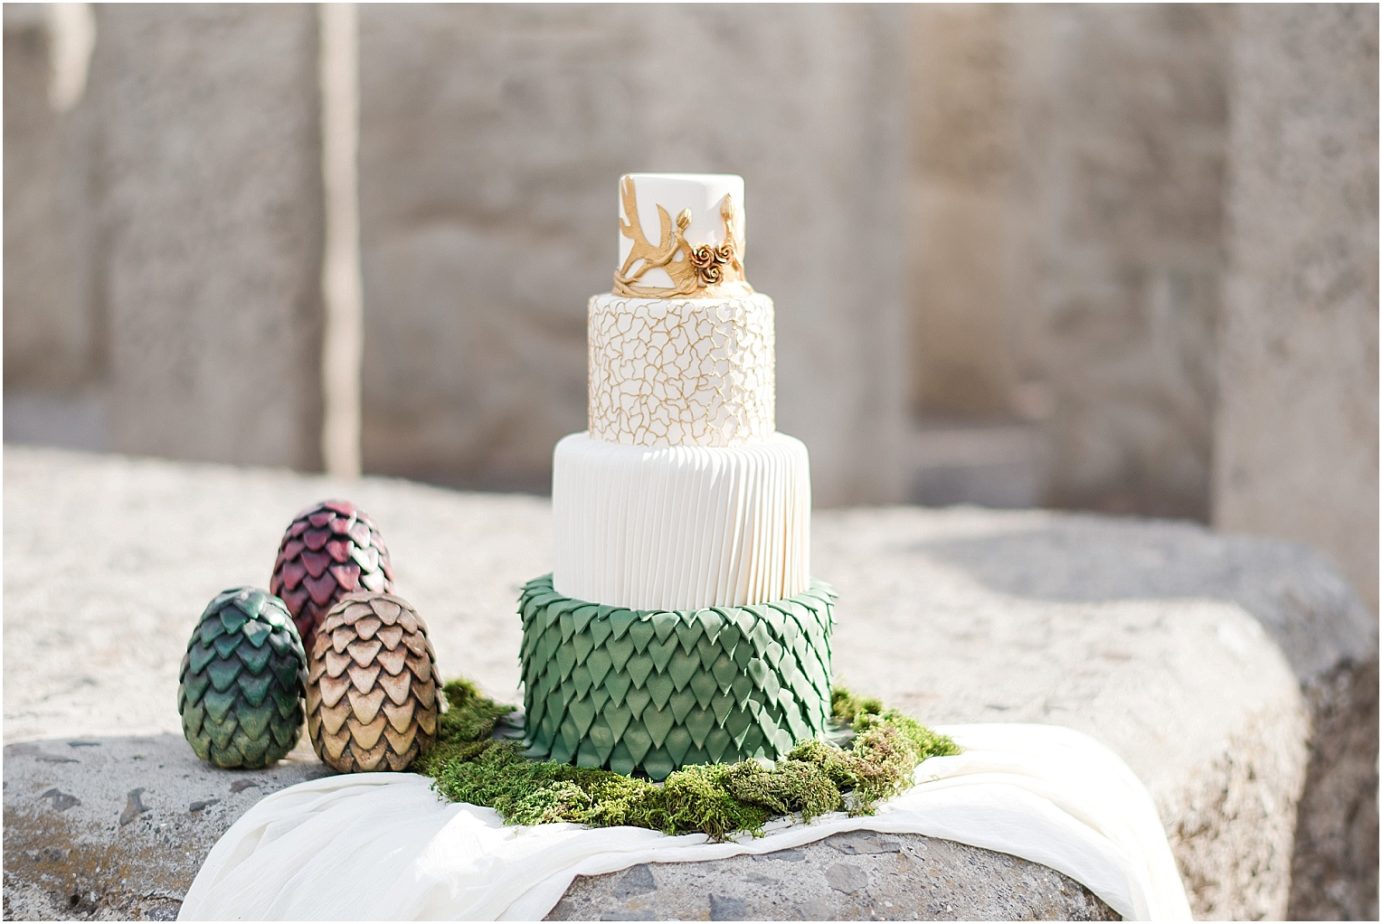 Game of Thrones wedding inspiration Goldendale WA Styled Shoot wedding cake with dragon scales